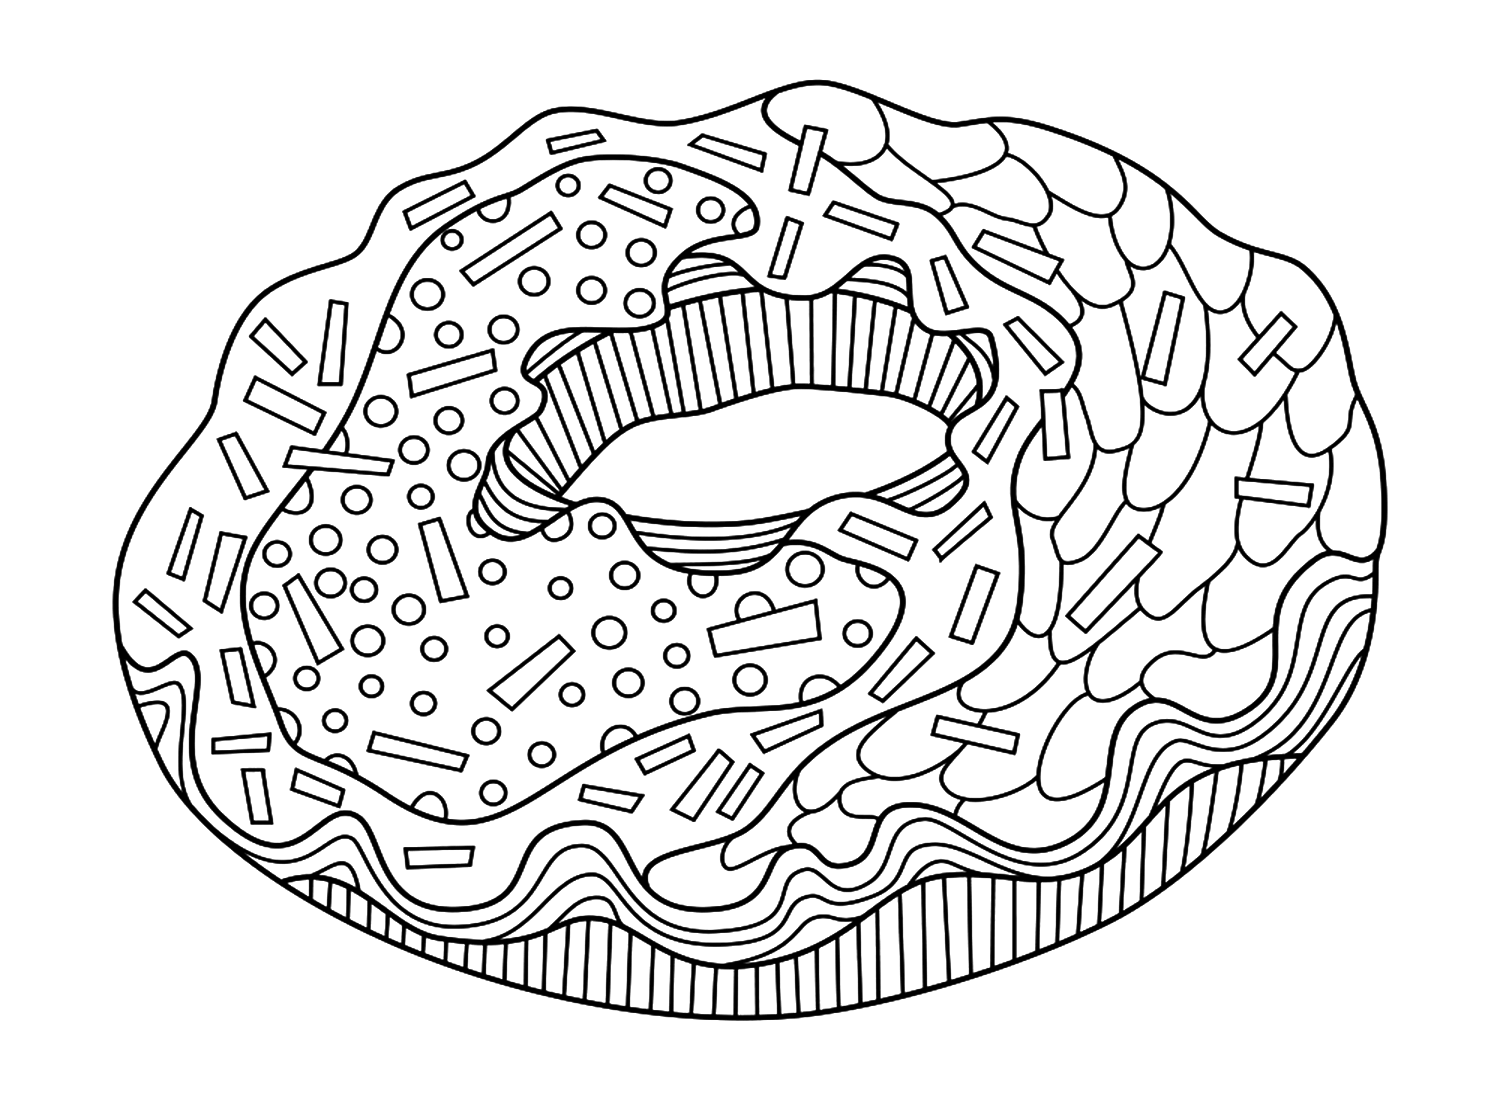 Zentangle Donut Coloring Page from Donut